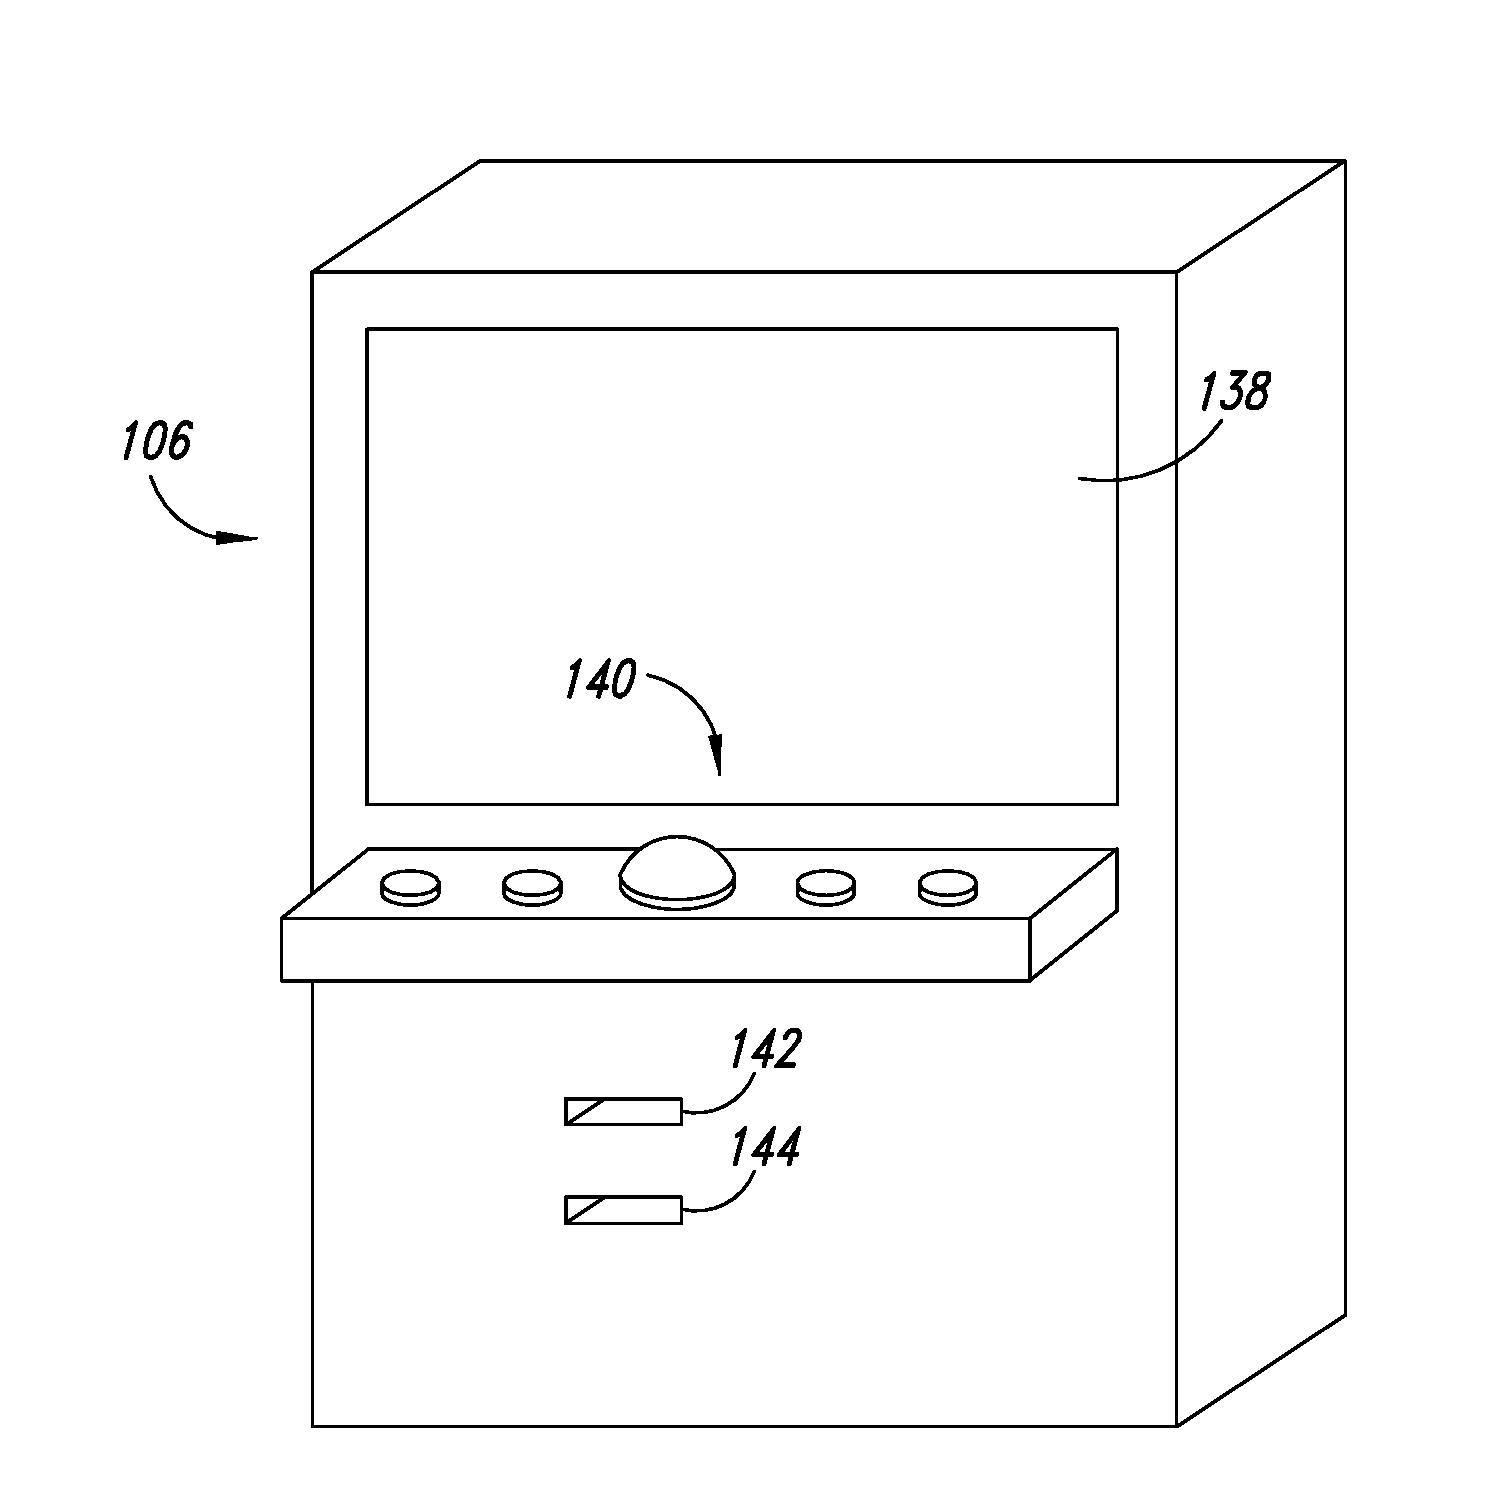 Systems, methods, and devices for providing instances of a secondary game